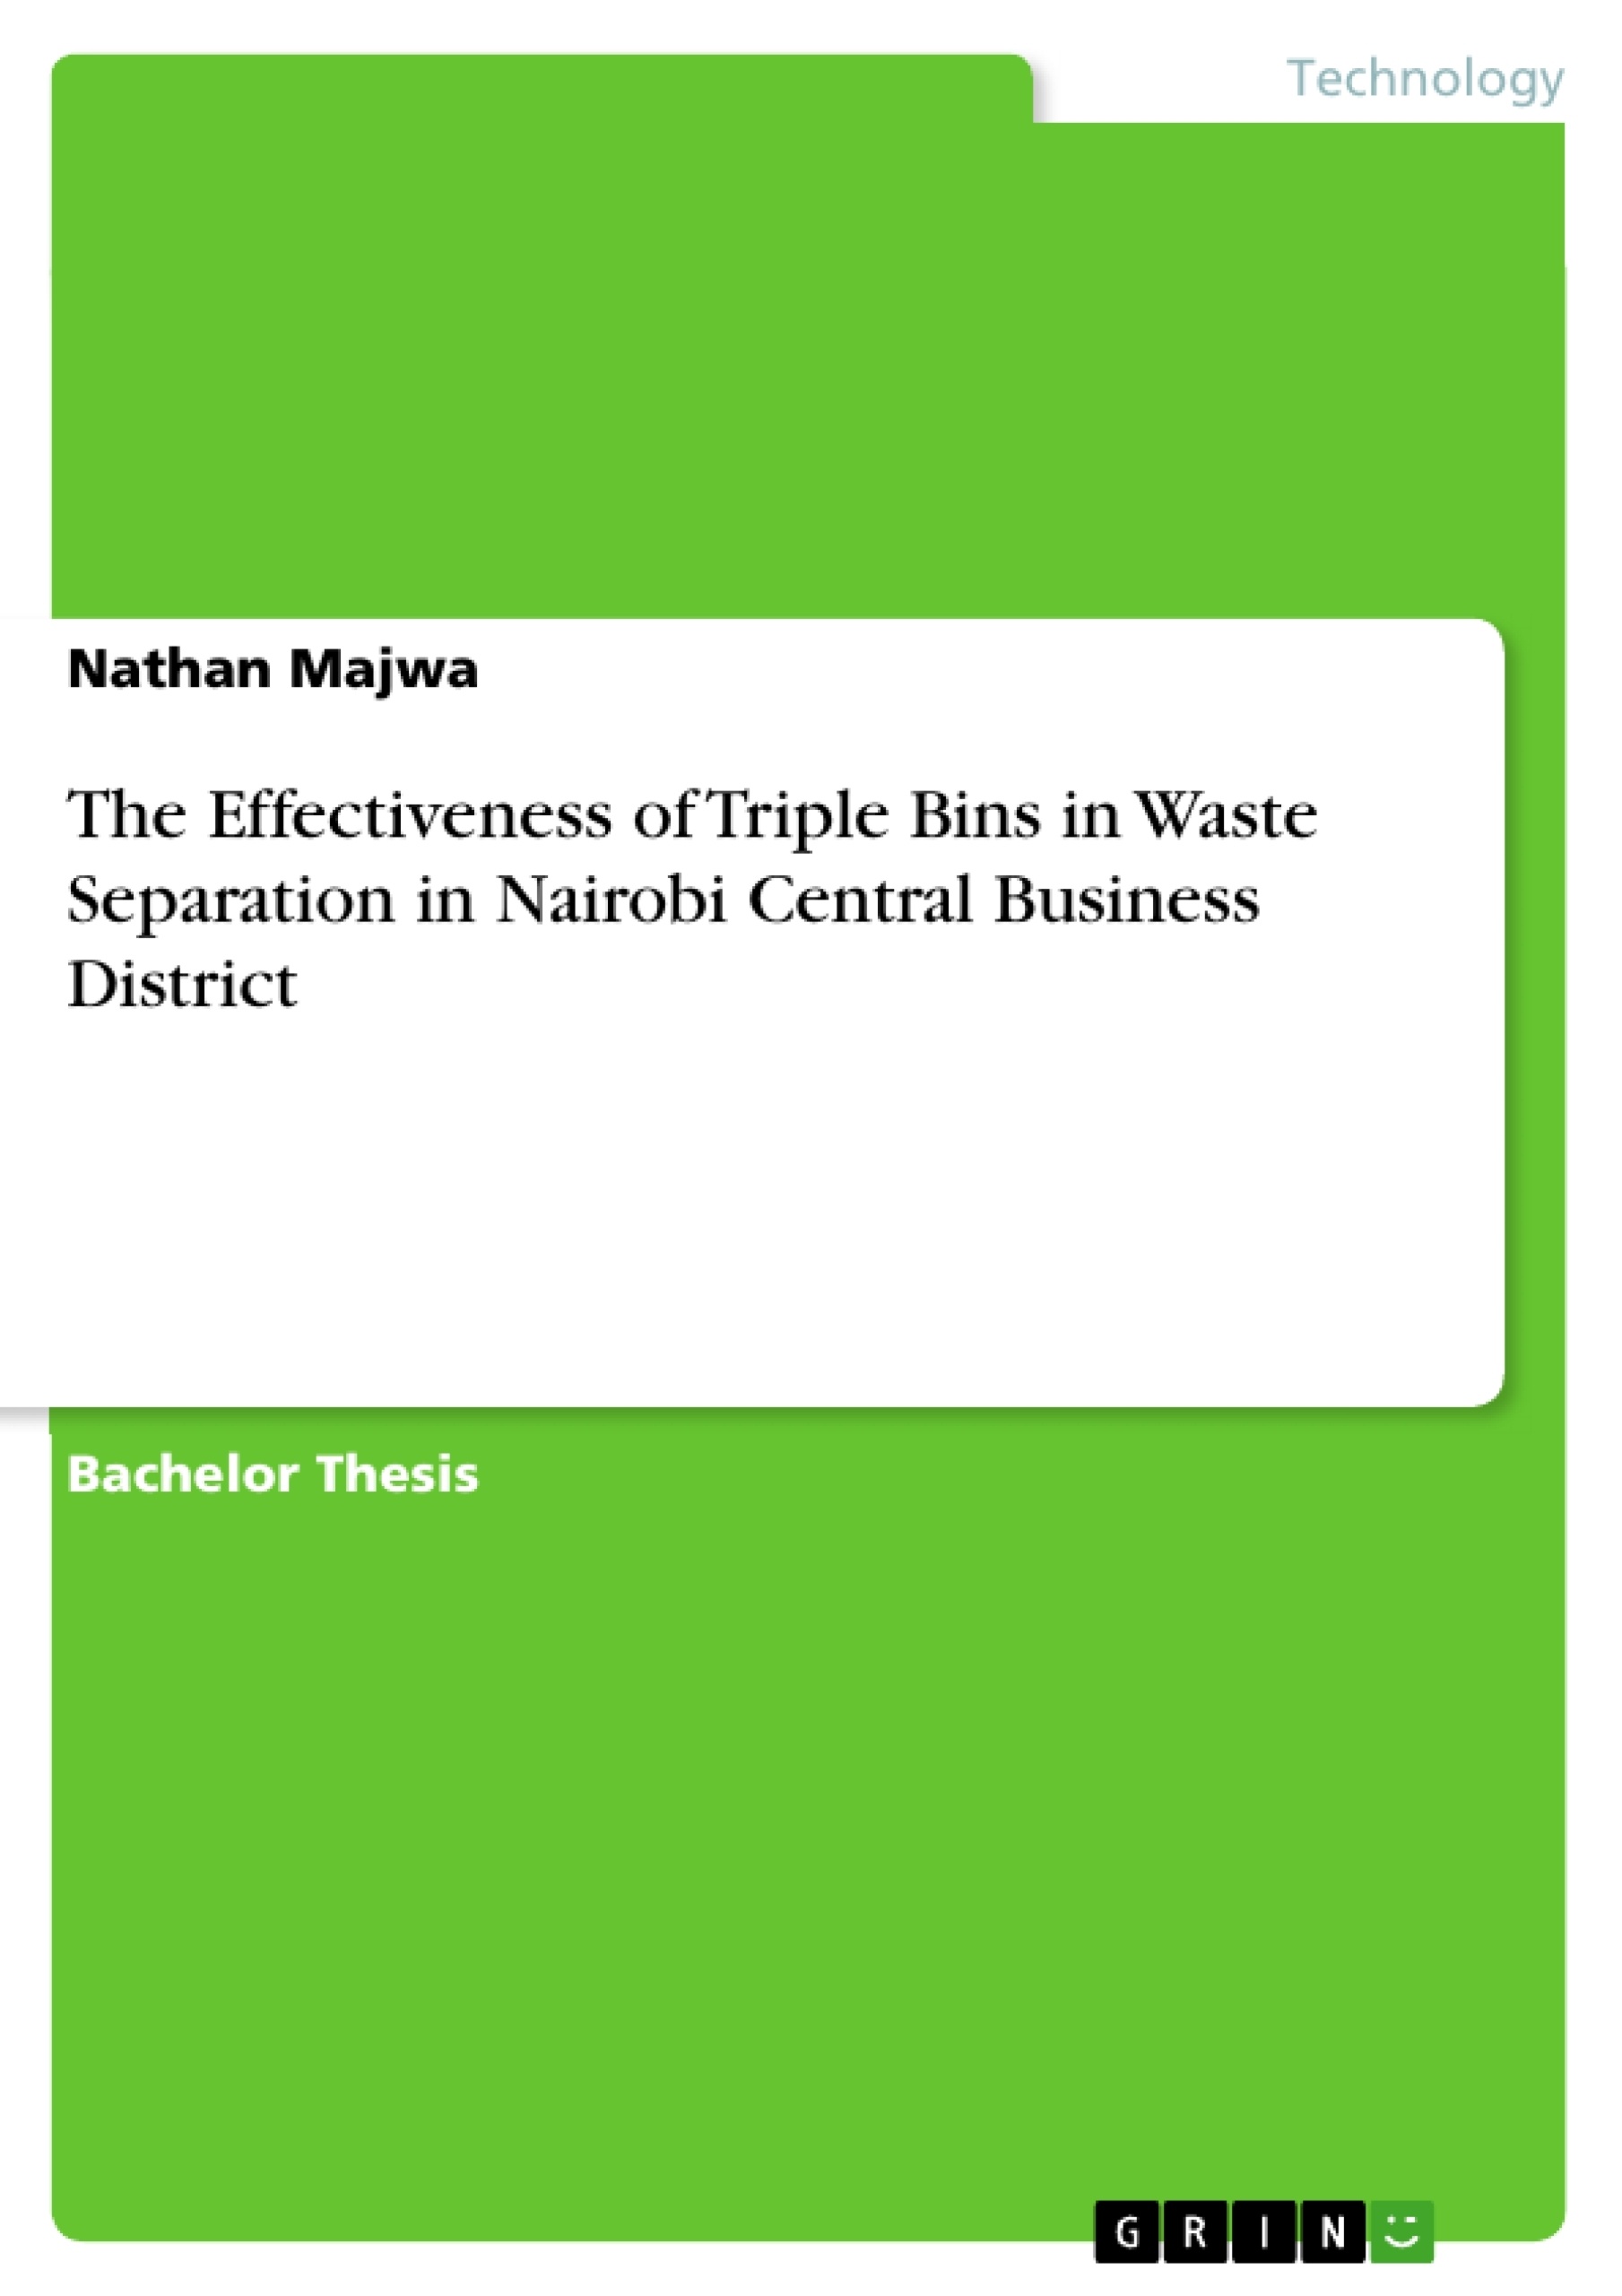 Titel: The Effectiveness of Triple Bins in Waste Separation in Nairobi Central Business District